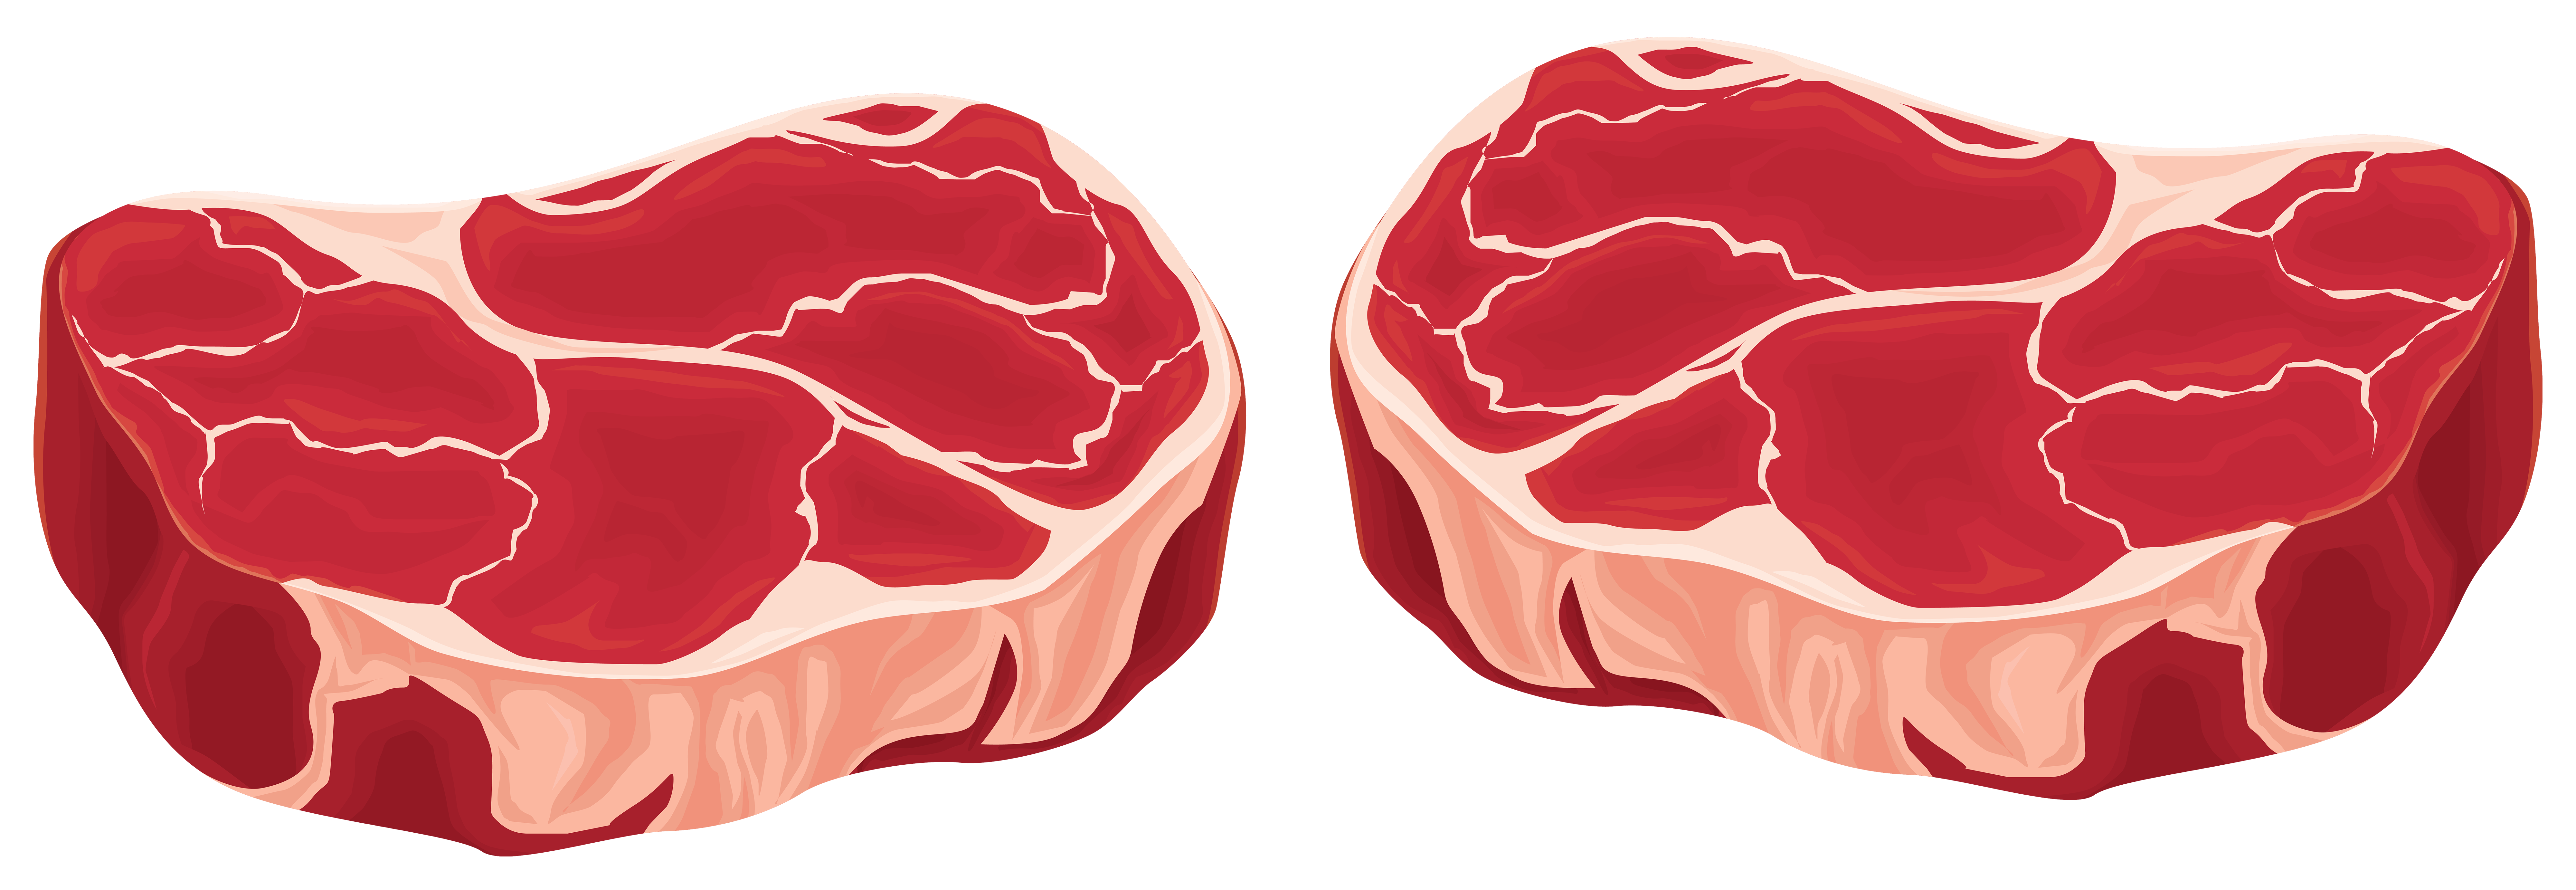 meat clipart images - photo #14